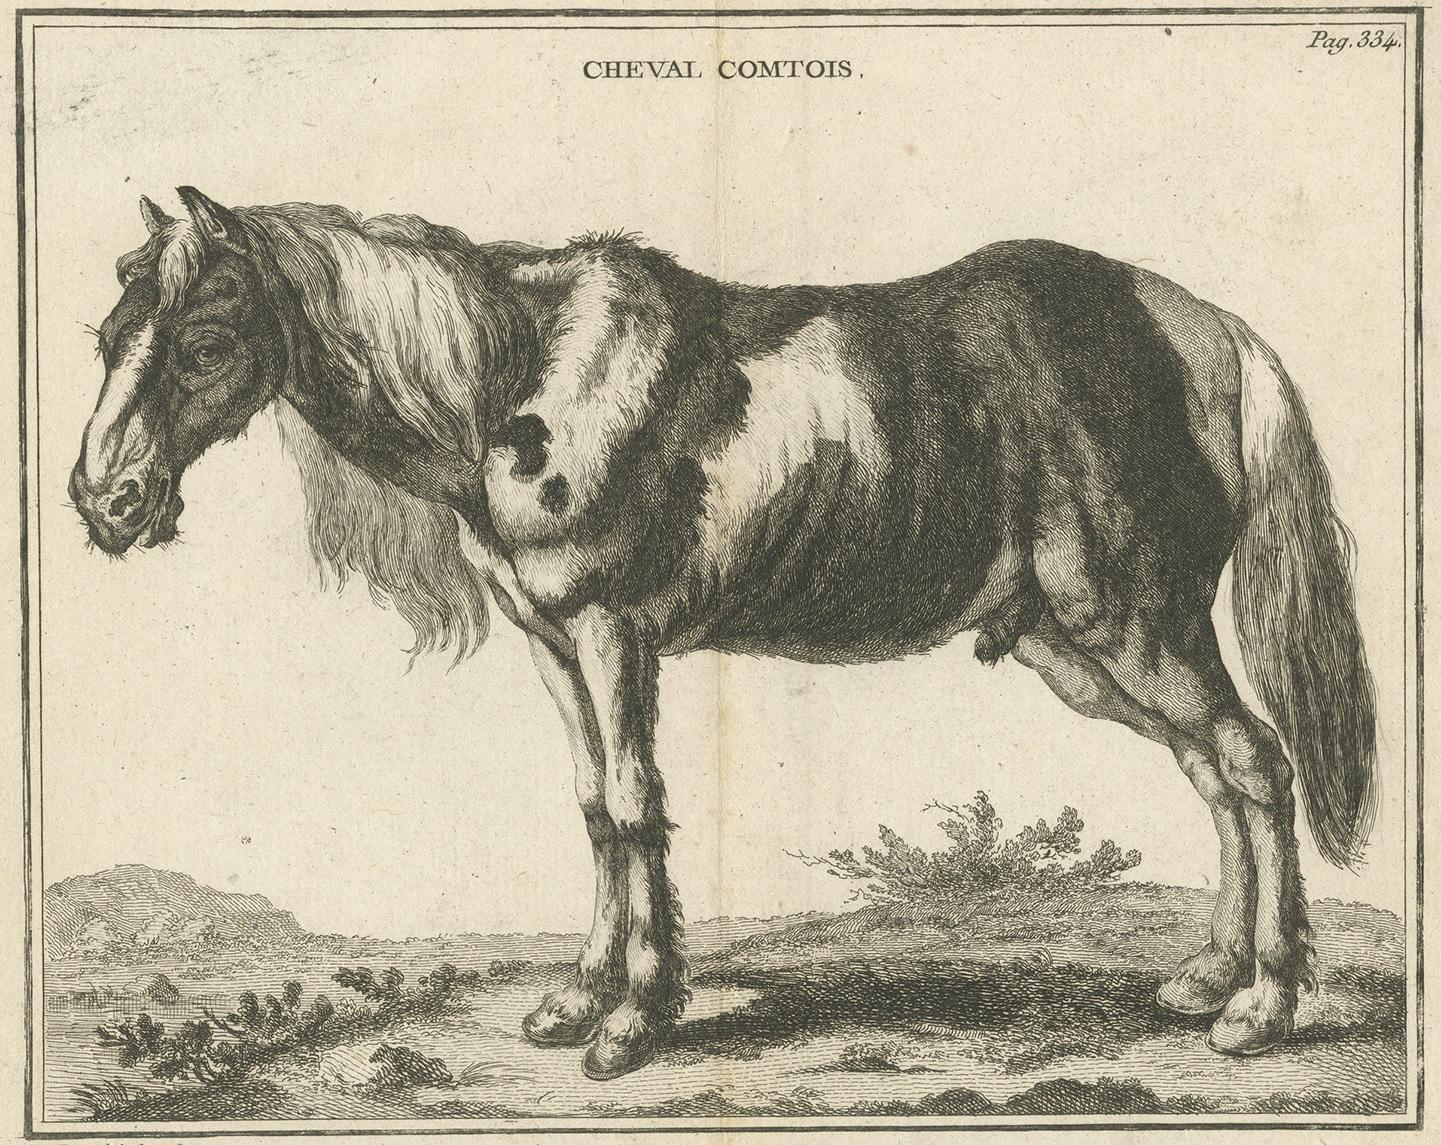 Antique print titled 'Cheval Comtois'. Copper engraving of a Comtois horse, a draft horse that originated in the Jura Mountains on the border between France and Switzerland. This print originates from 'Handboek der genees- en verloskunde van het vee